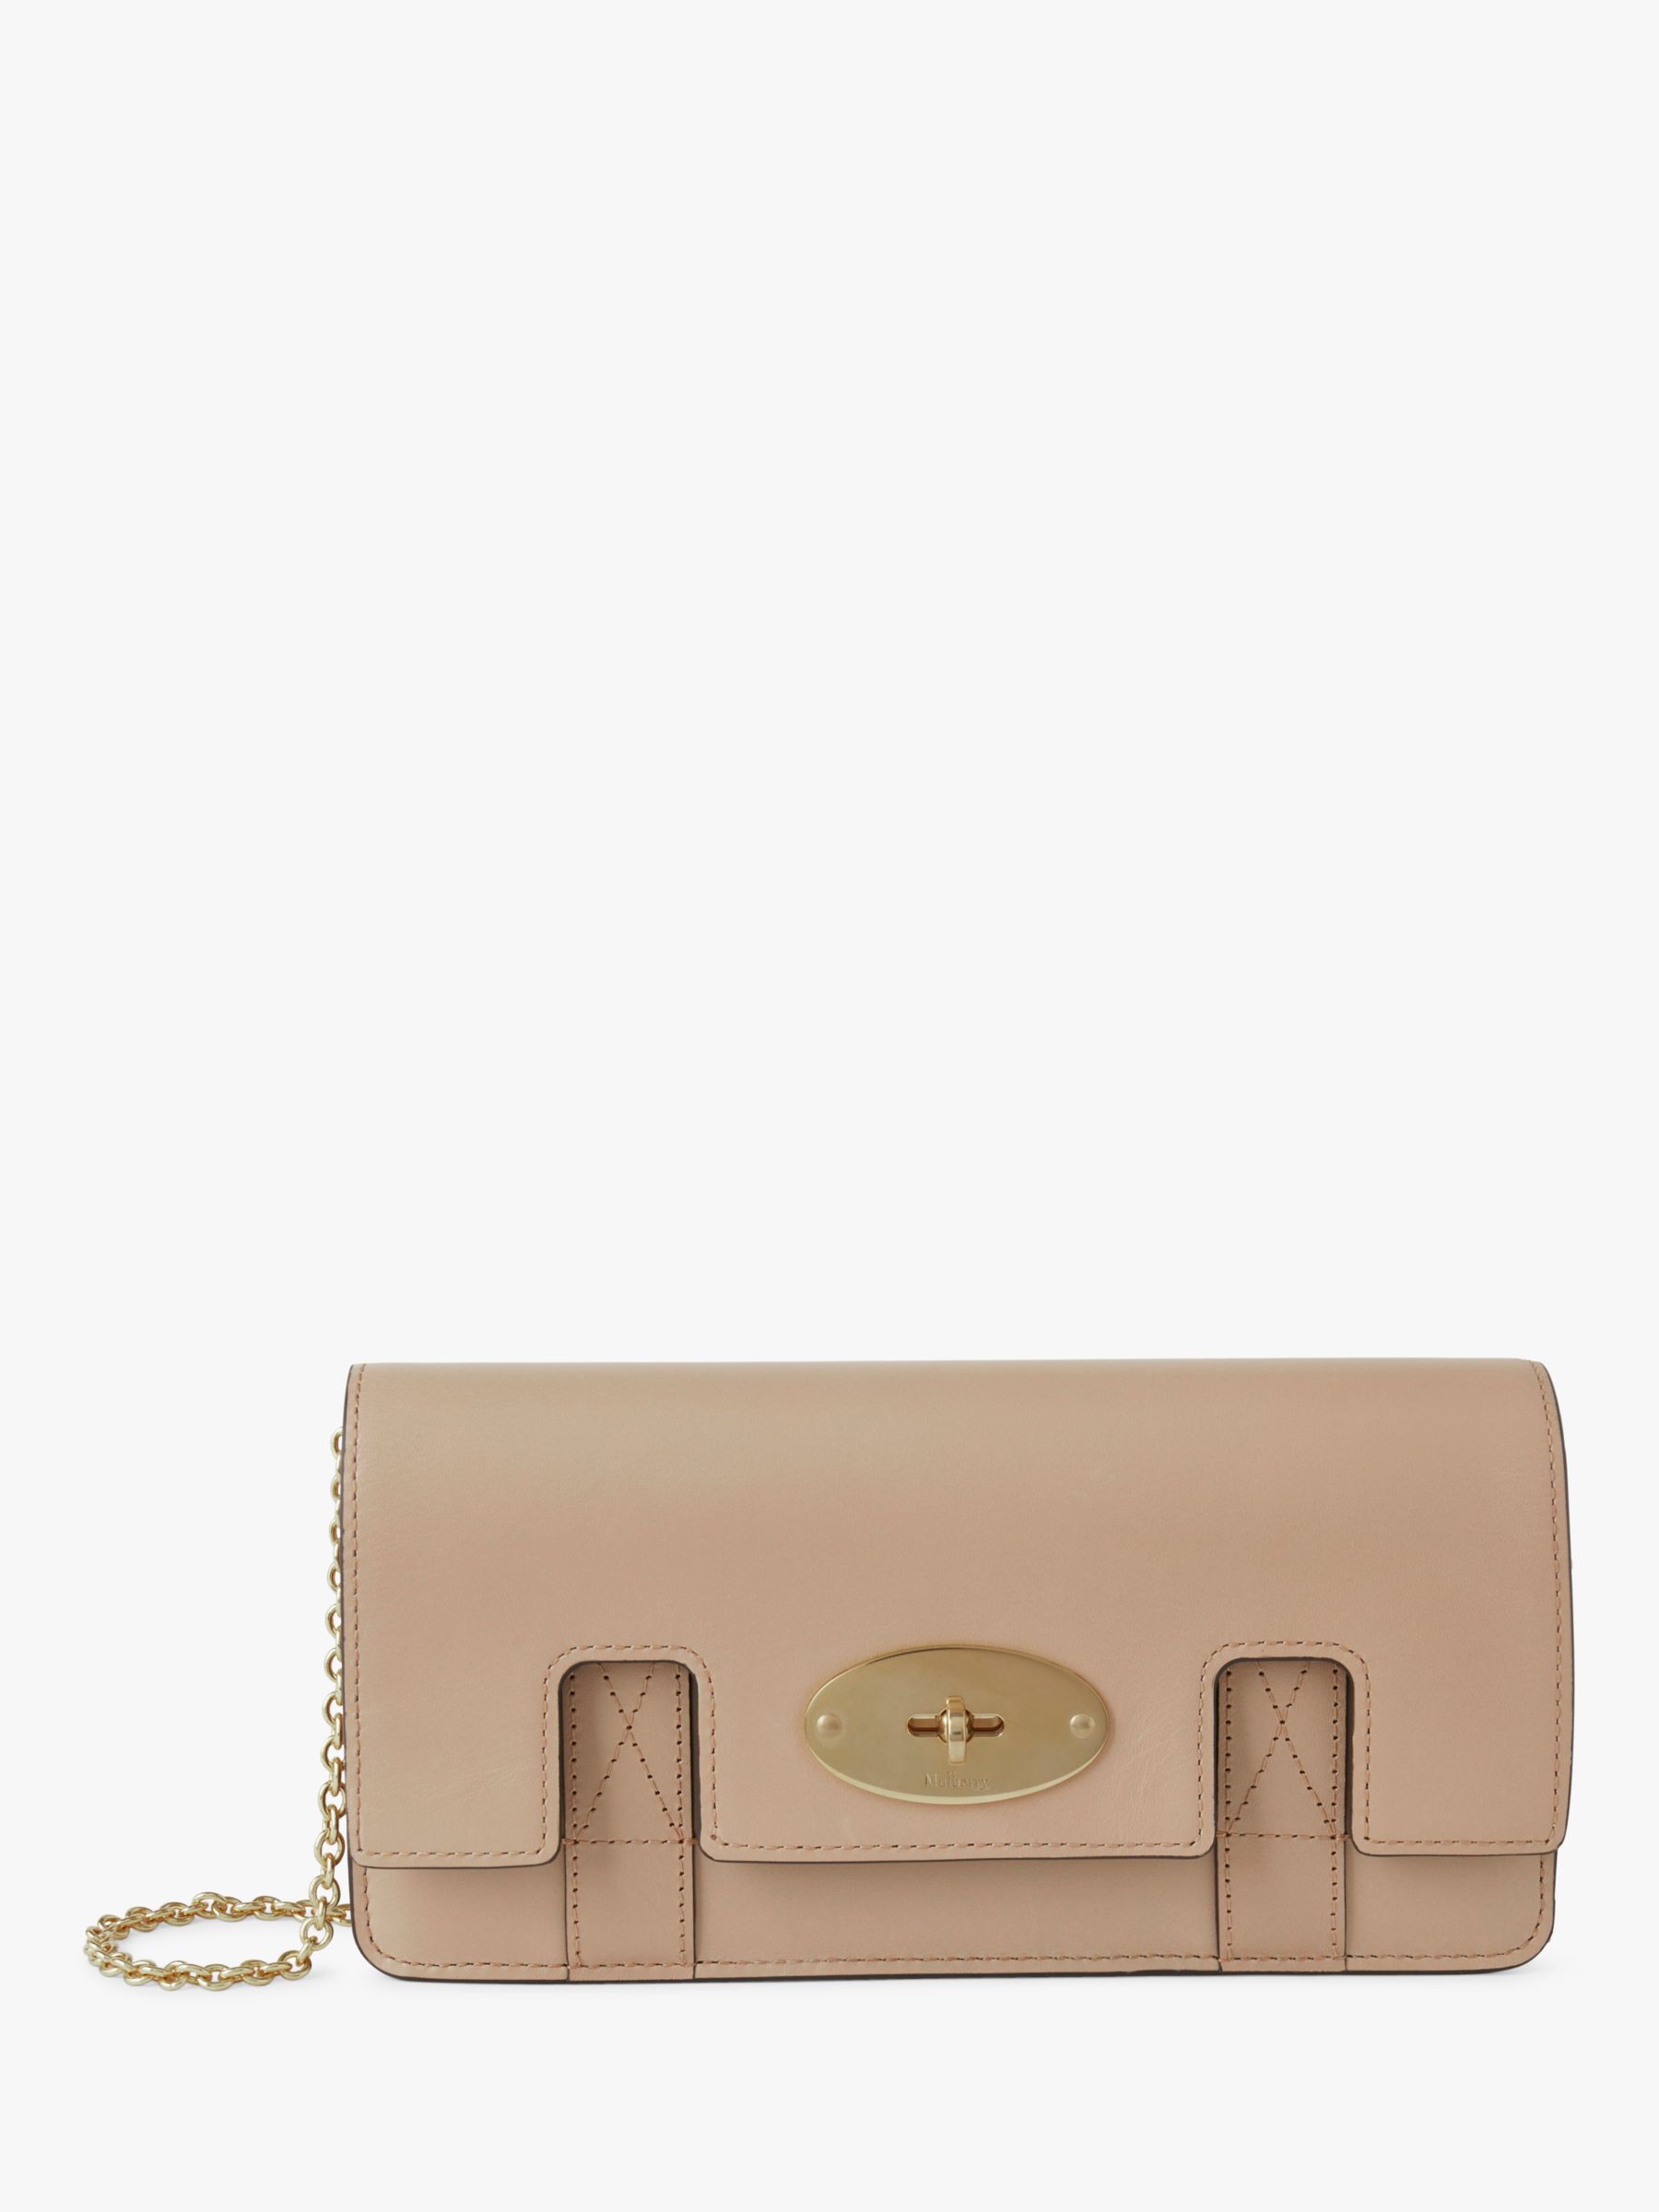 Mulberry East West Bayswater Clutch, Maple